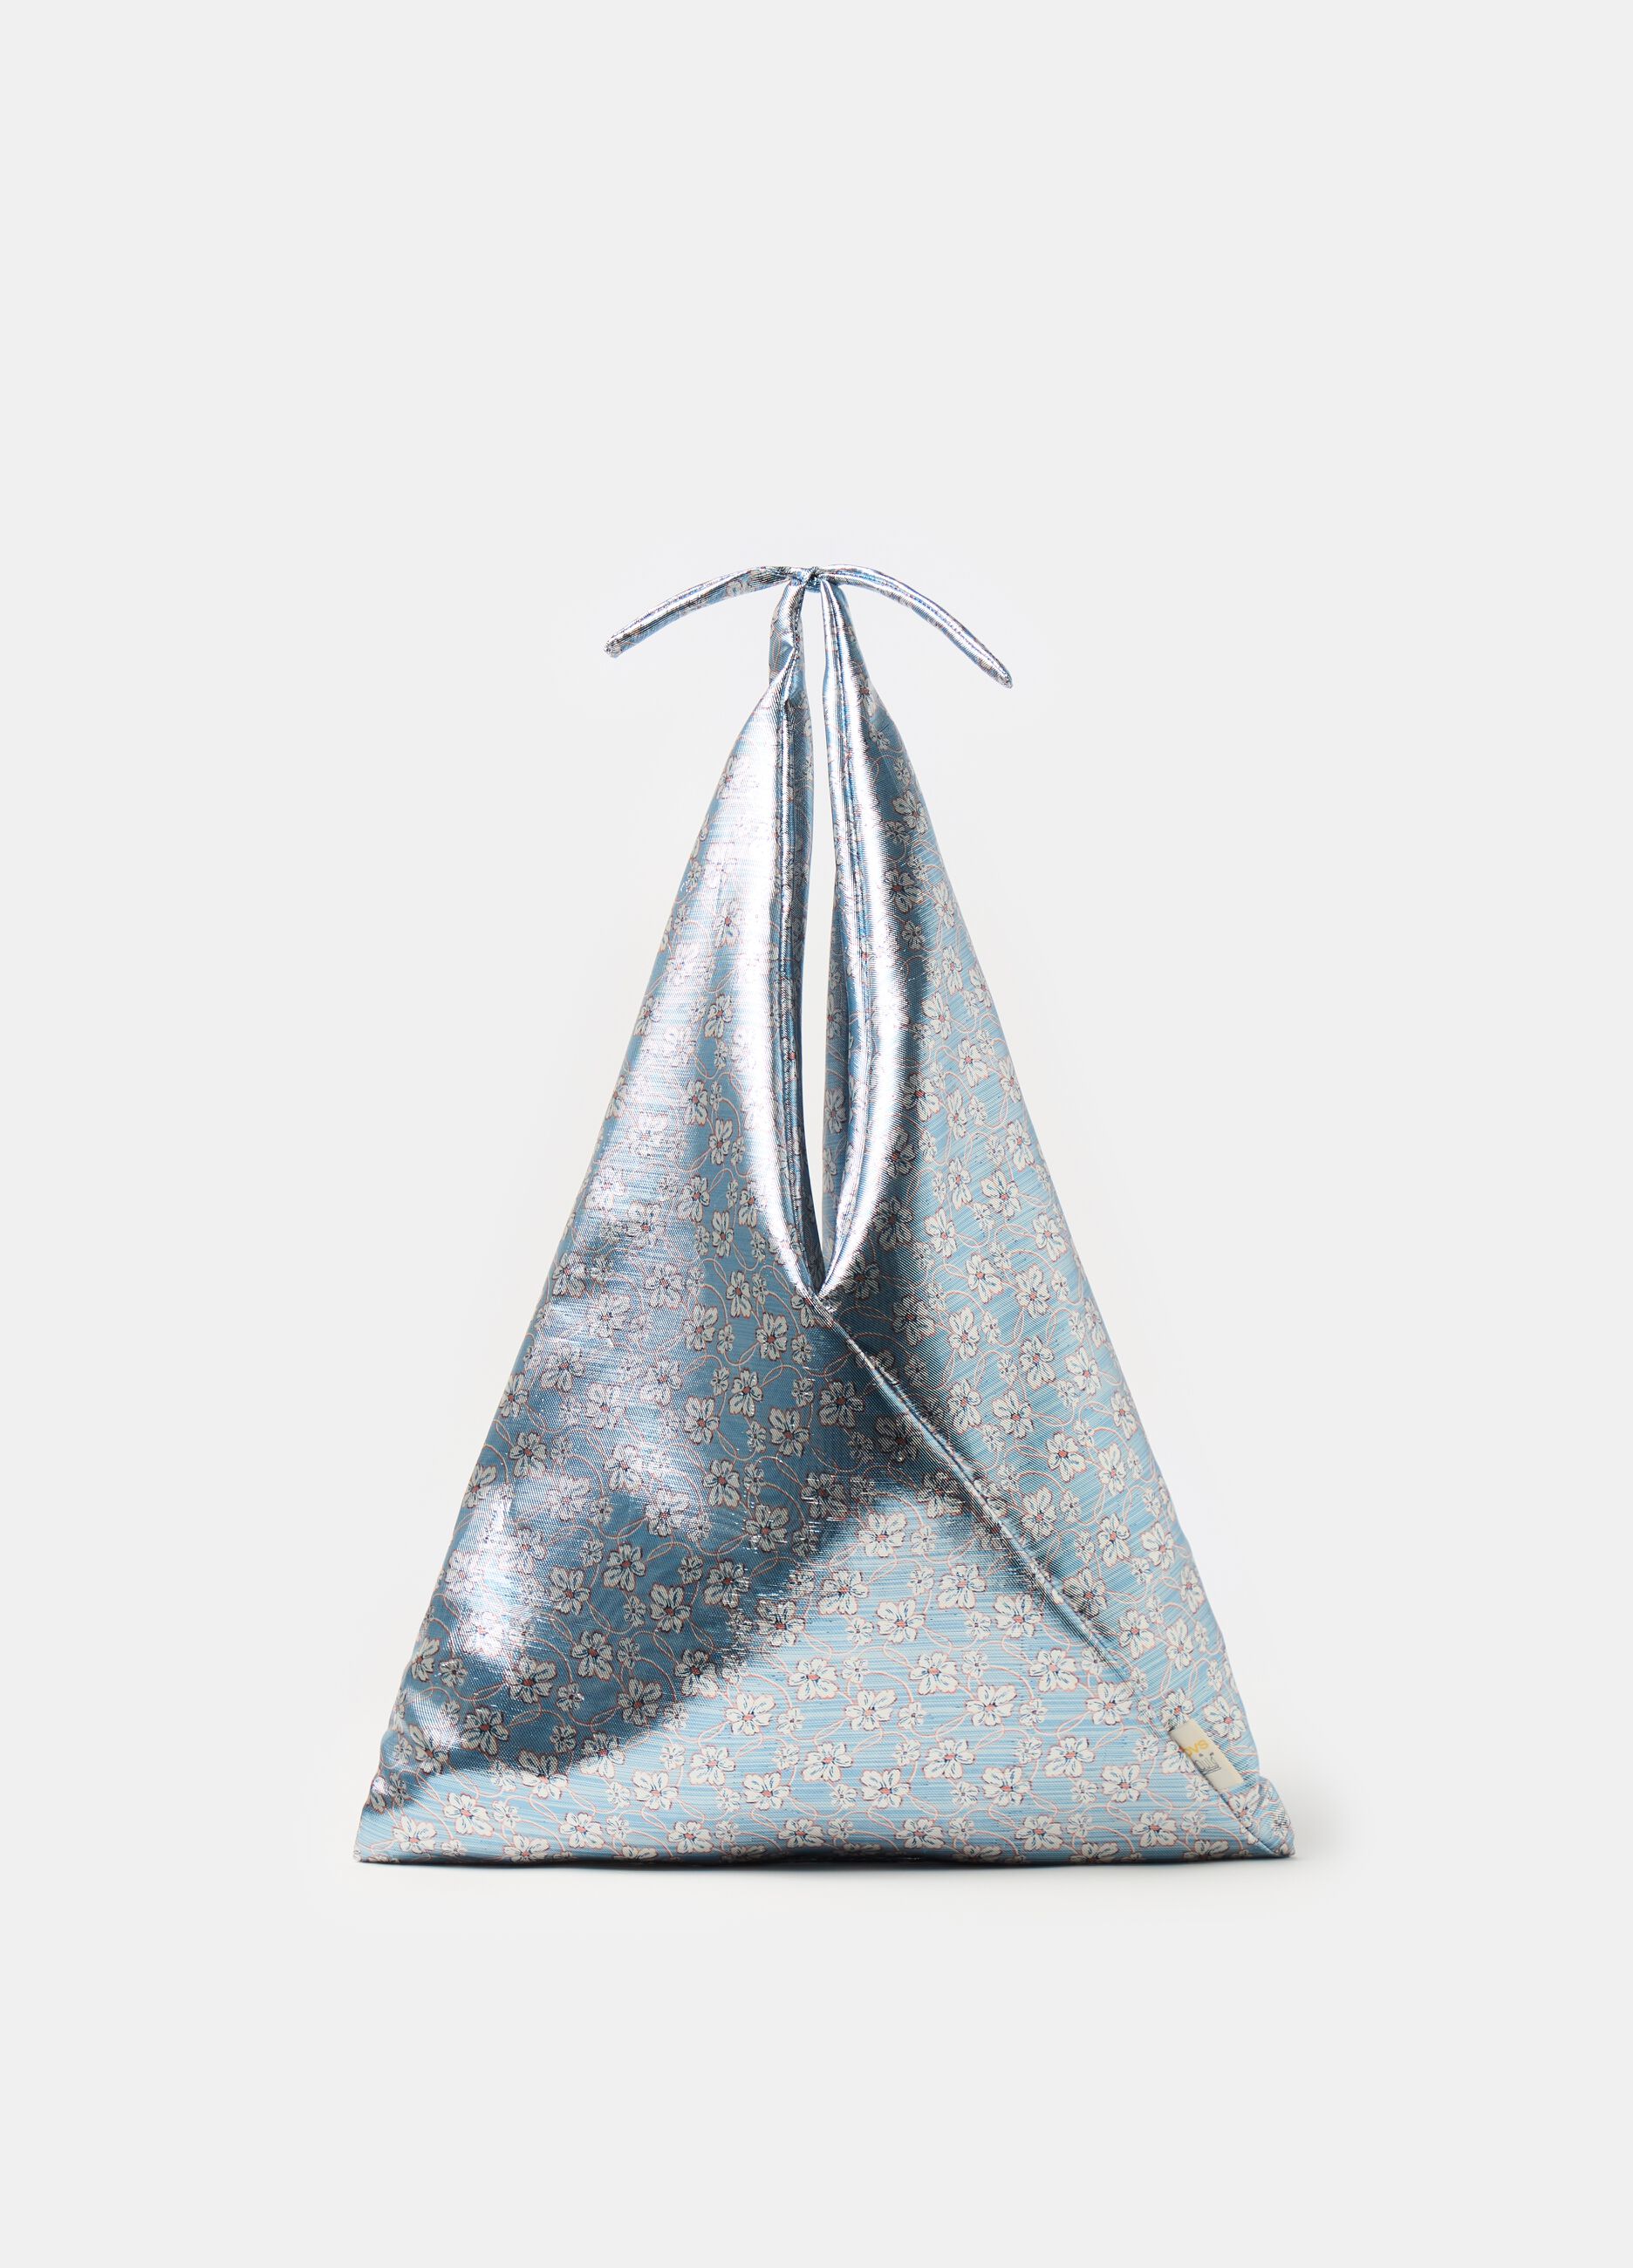 Quid shopping bag with knot